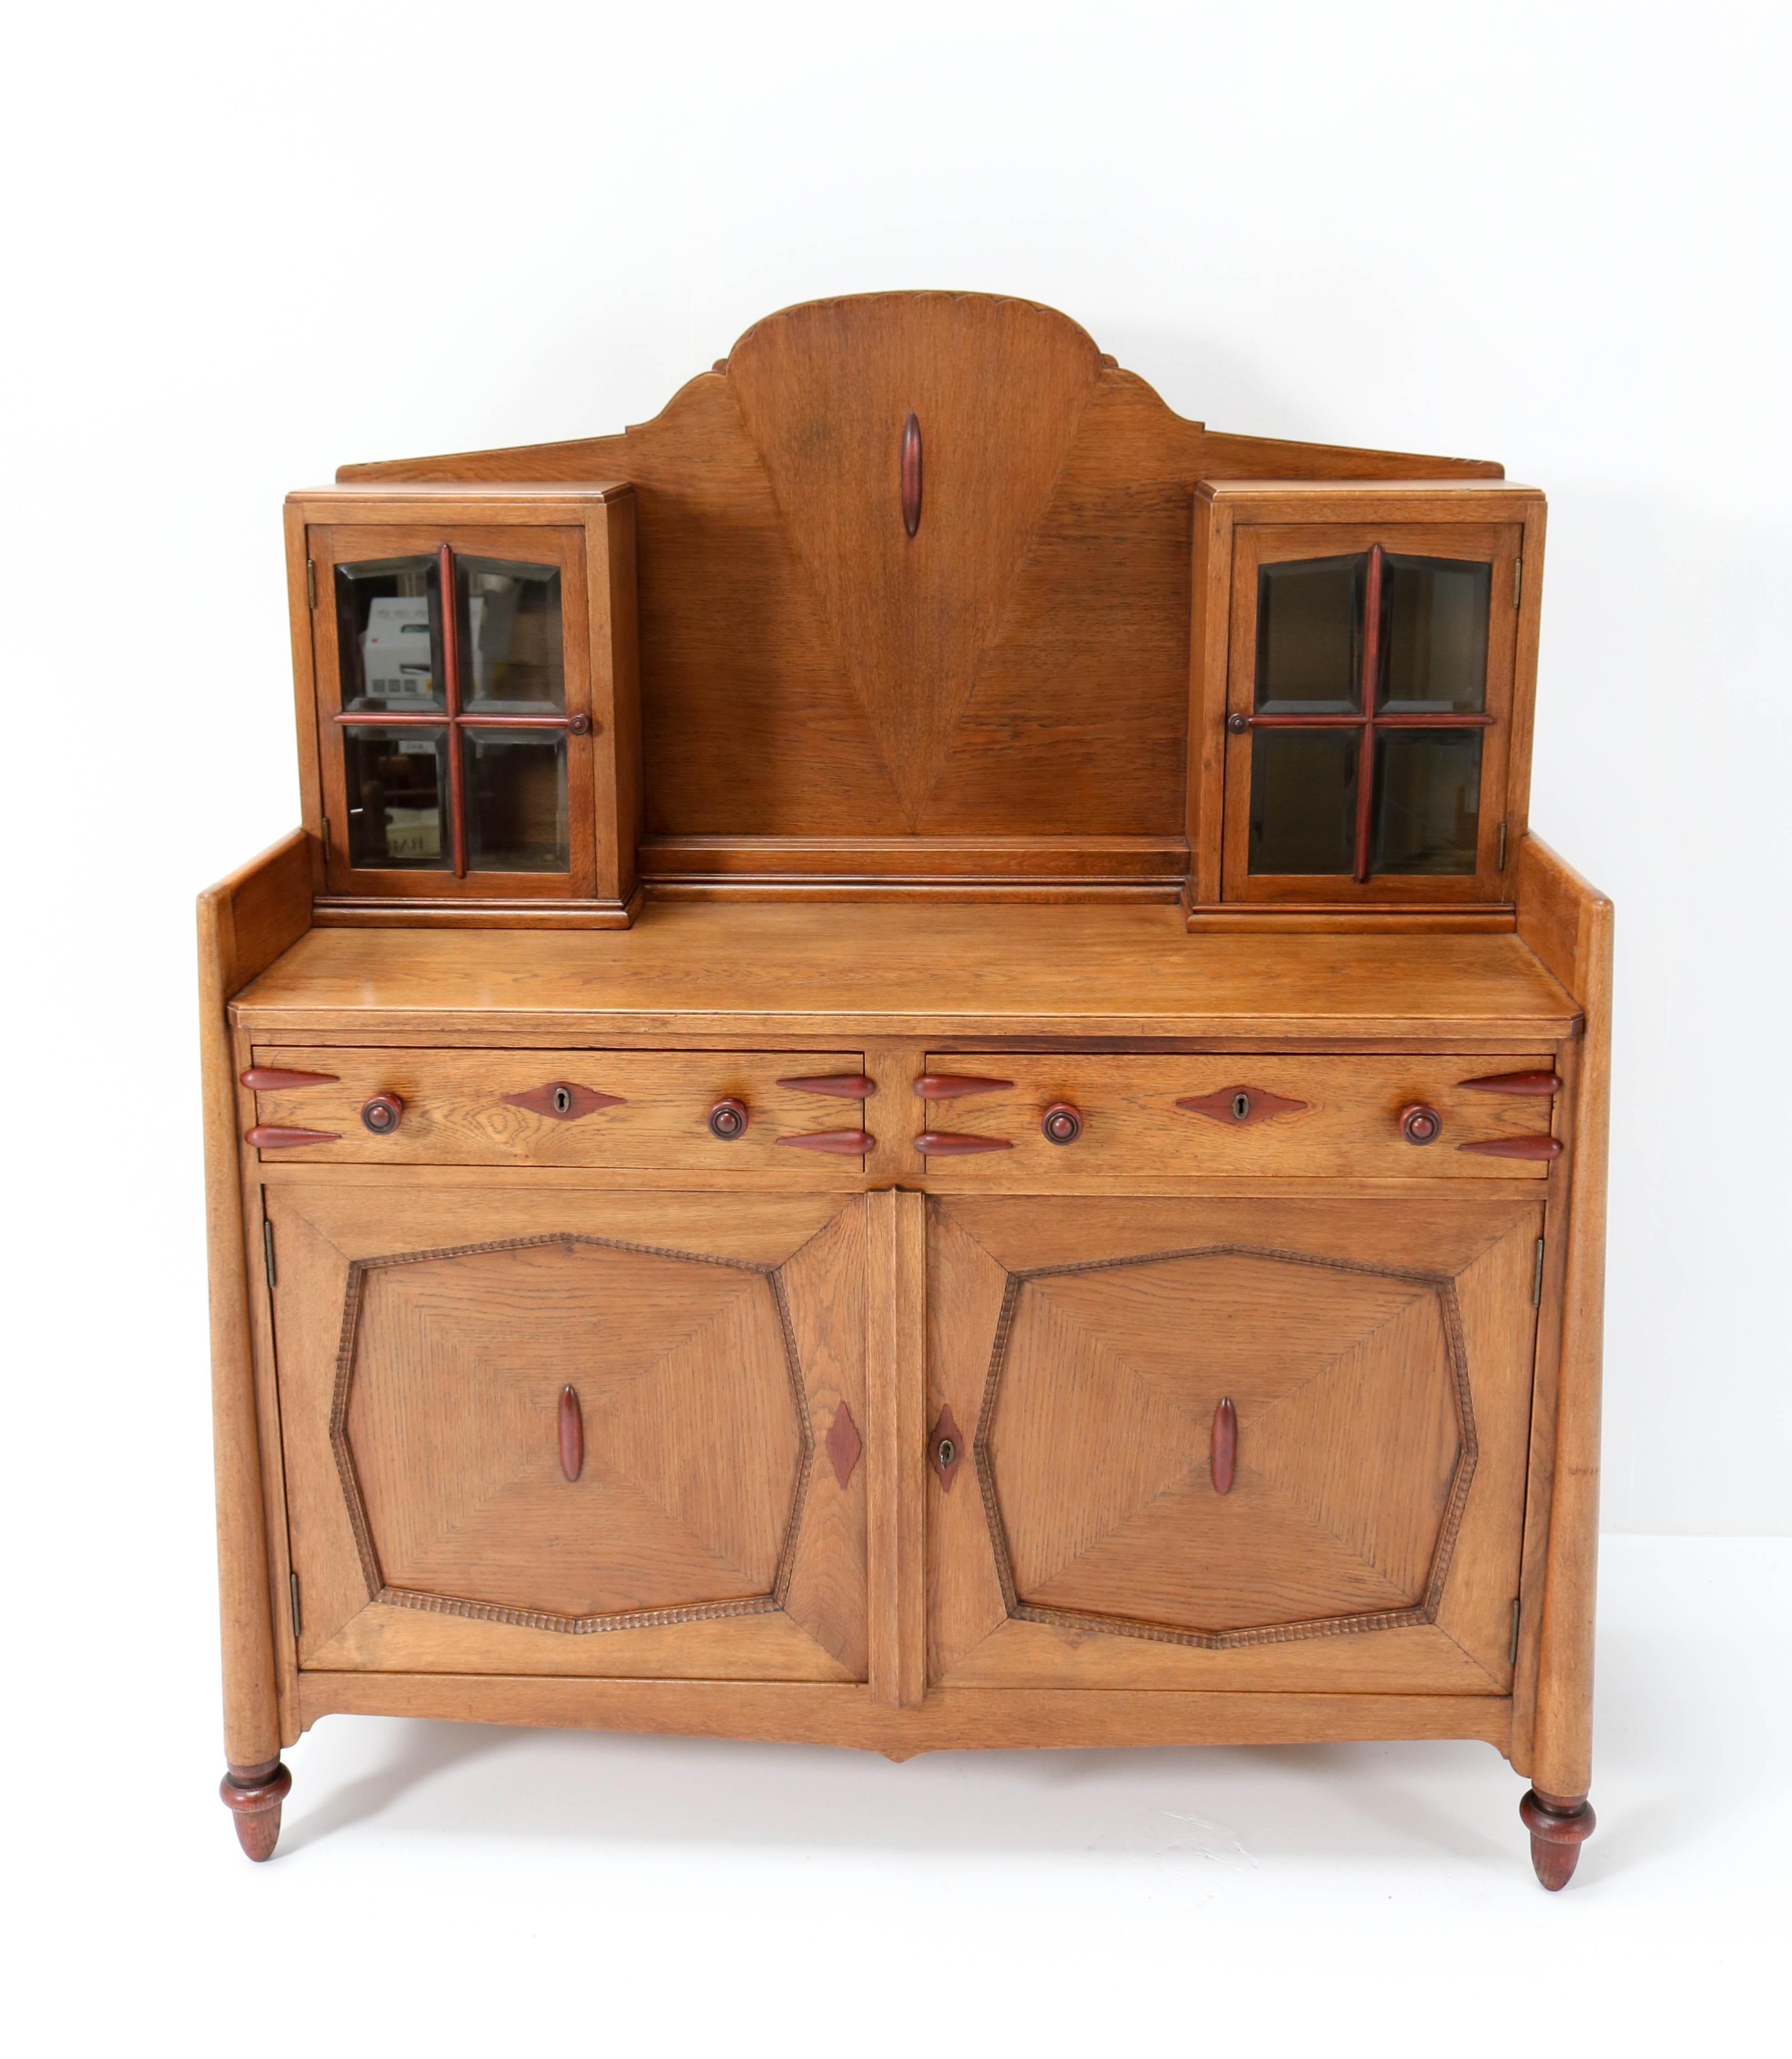 Magnificent and rare Art Deco Amsterdam School buffet or sideboard.
Design by Fa. Speelman Rotterdam.
Striking Dutch design from the 1920s.
Solid oak with mahogany knobs and details.
The top has original beveled glass in both doors.
In very